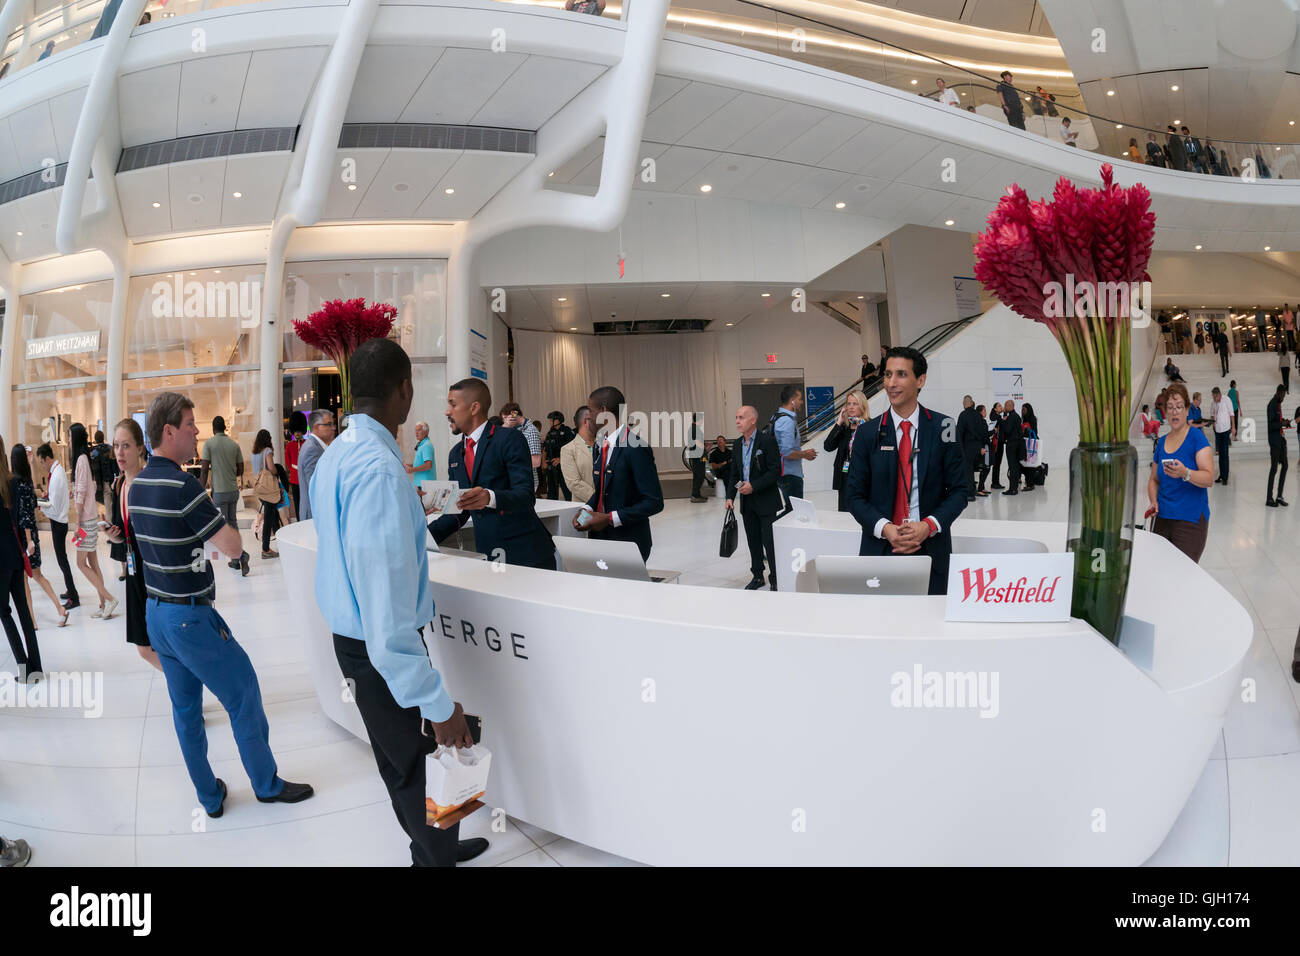 The concierge desk in the World Trade Center Transportation Hub, known as the Oculus, on Tuesday, August 16, 2016 during the grand opening of Westfield's retail spaces. The 350,000 square foot retail space will feature over 100 stores when they all open, including a now opened Apple Store. The mall opens almost 15 years after the World Trade Center terrorist attack.  (© Richard B. Levine) Stock Photo